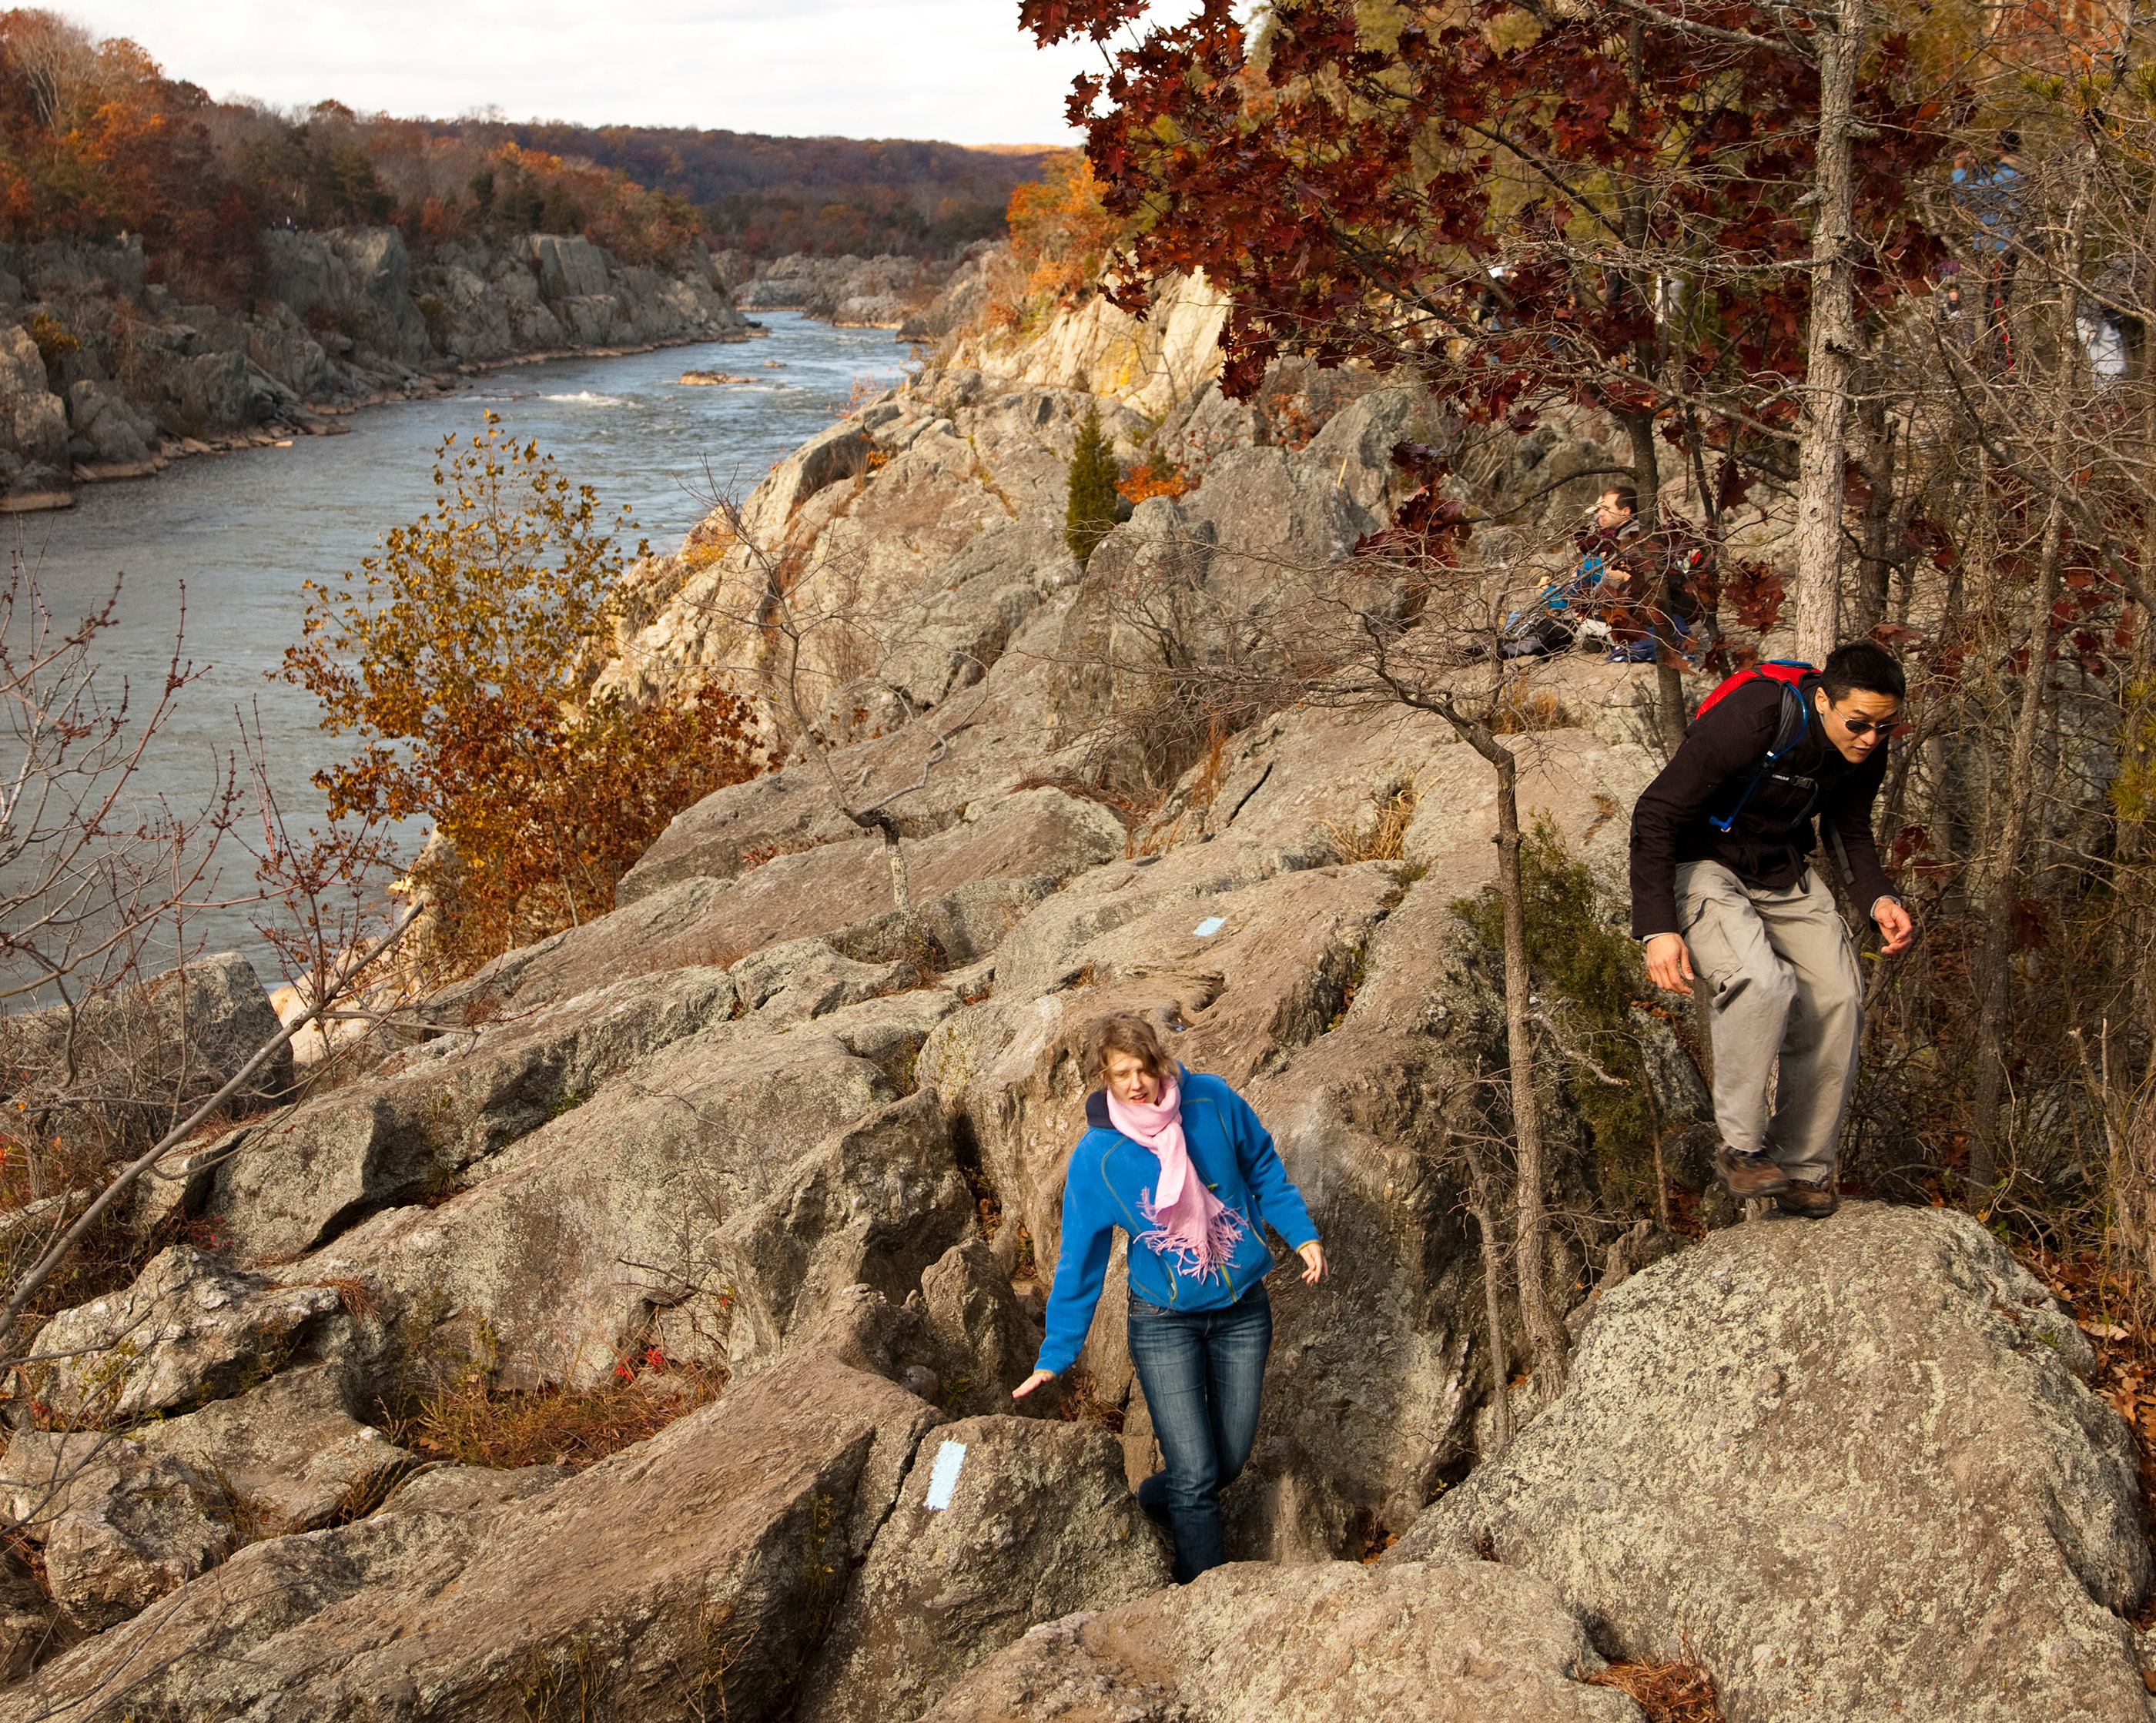 The Billy Goat Trail is a 4.7-mile (7.6 km) hiking trail that follows a path between the C&amp;O Canal and the Potomac River within the Chesapeake and Ohio Canal National Historical Park near Great Falls in Montgomery County, Maryland. Thre